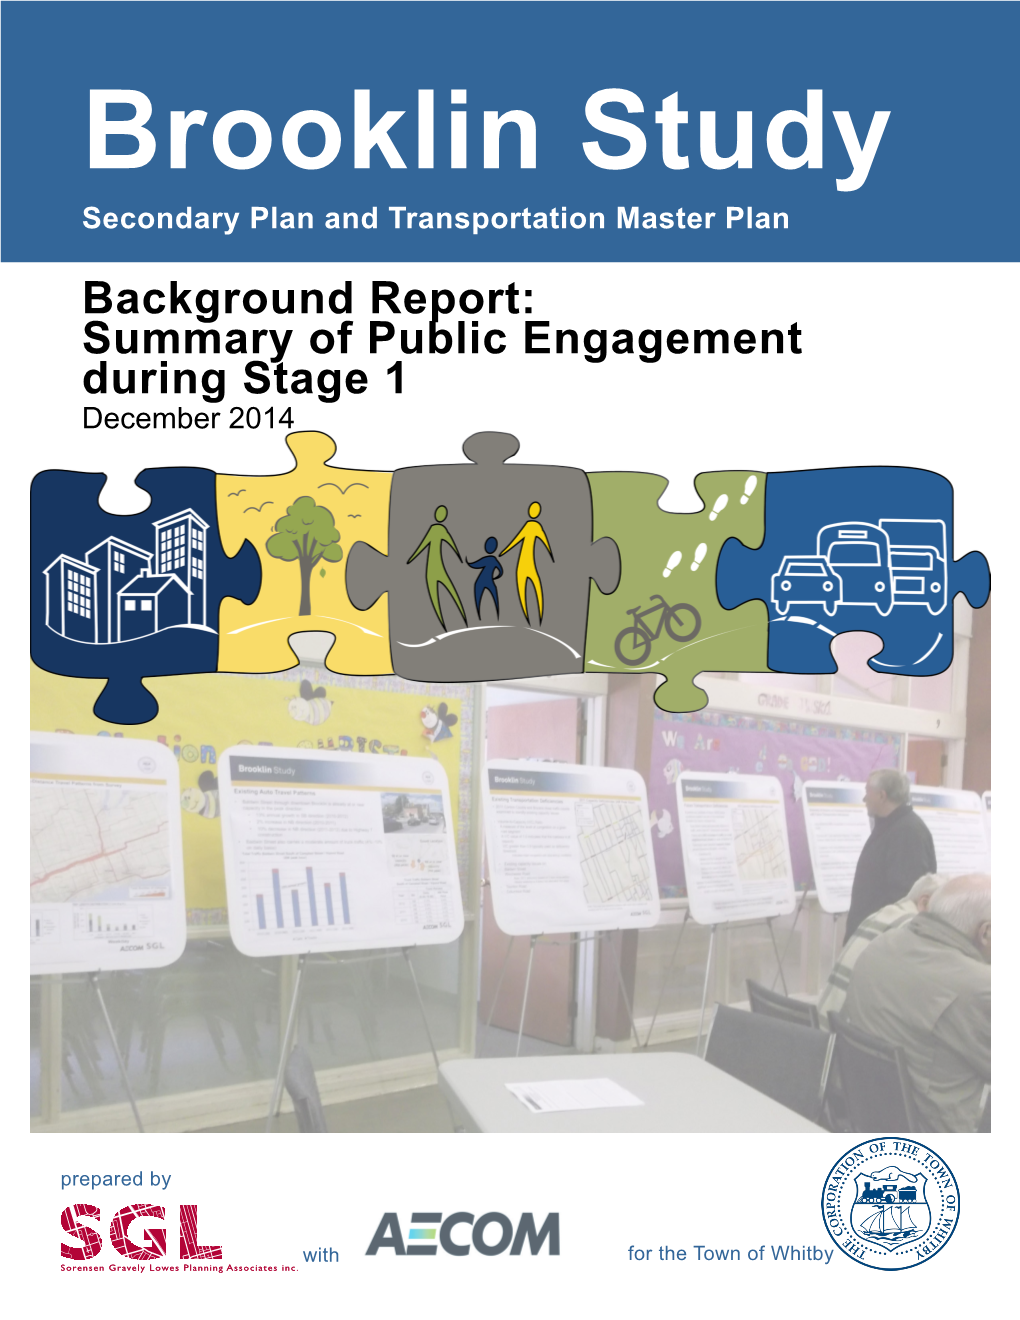 Brooklin Study Secondary Plan and Transportation Master Plan Background Report: Summary of Public Engagement During Stage 1 December 2014